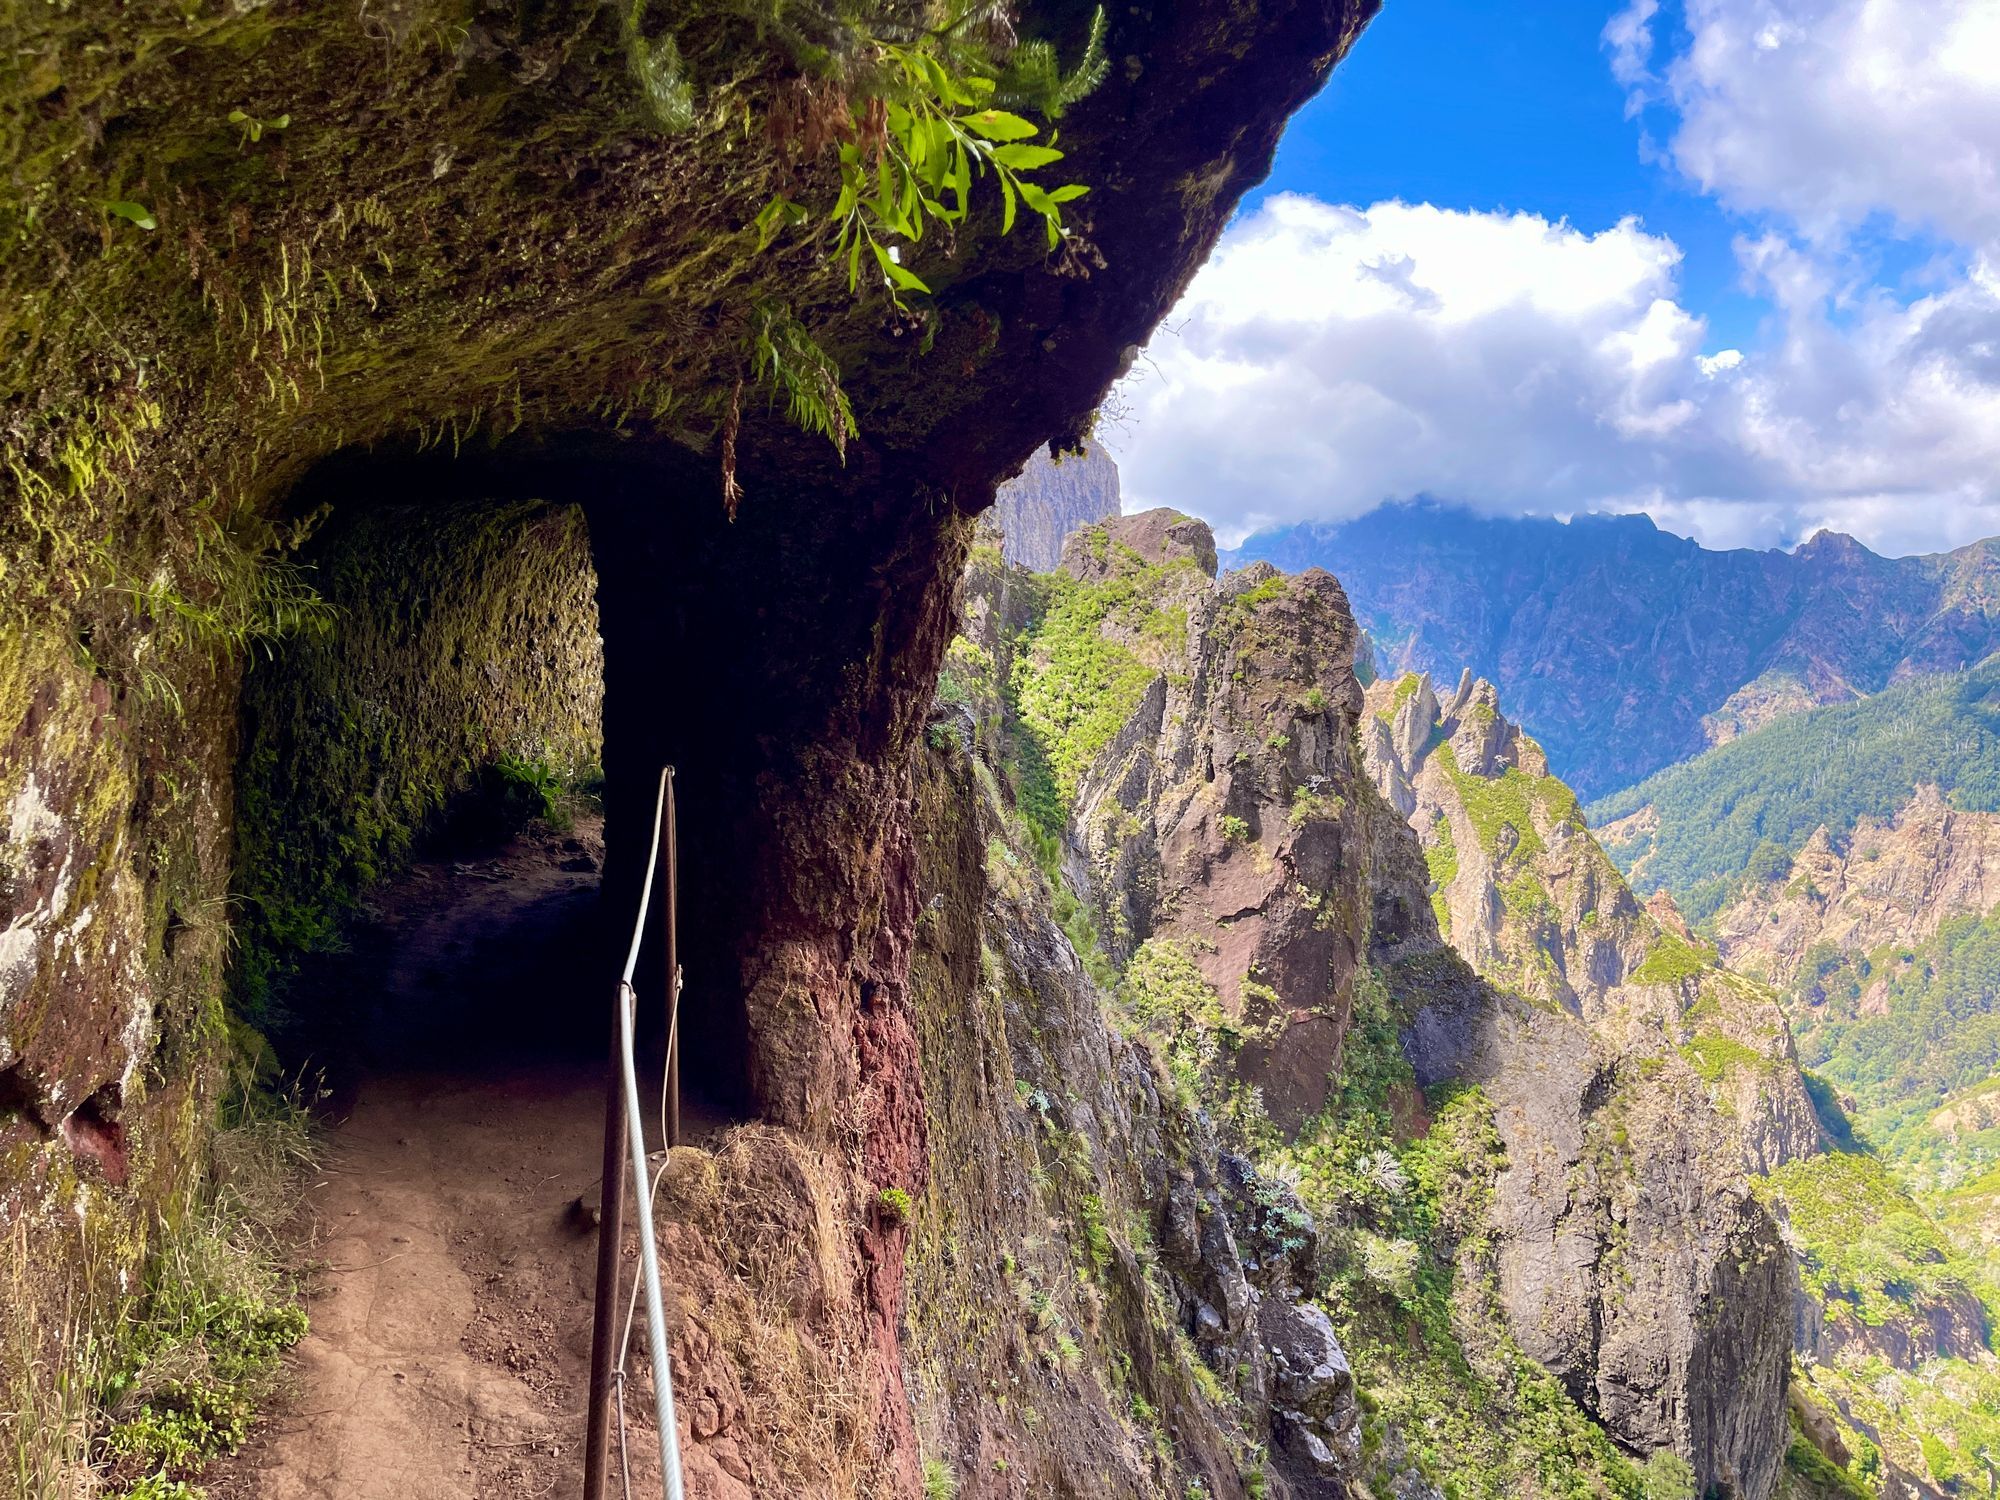 A hiking trail in the mountains of Madeira.